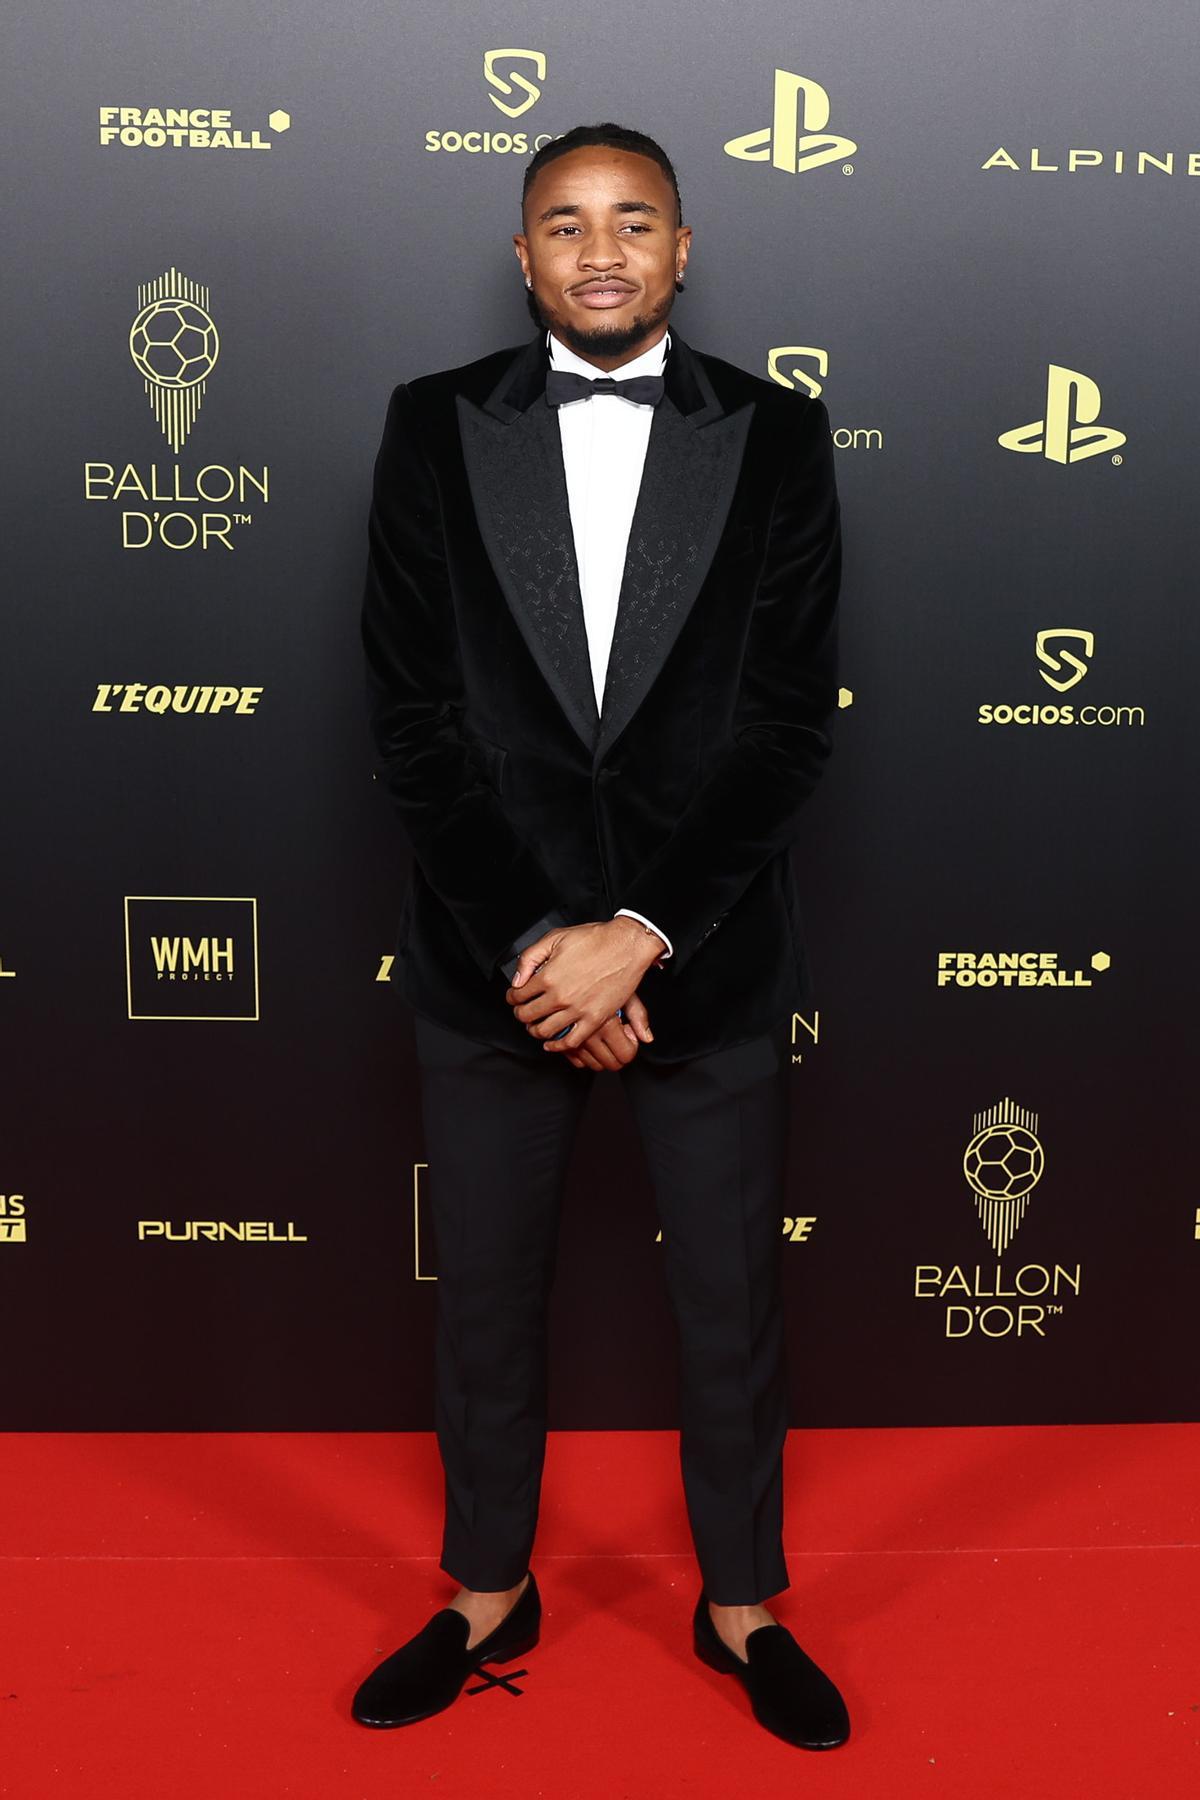 Paris (France), 17/10/2022.- Christopher Nkunku of RB Leipzig arrives for the Ballon d’Or ceremony in Paris, France, 17 October 2022. For the first time the Ballon d’Or, presented by the magazine France Football, will be awarded to the best players of the 2021-22 season instead of the calendar year. (Francia) EFE/EPA/Mohammed Badra